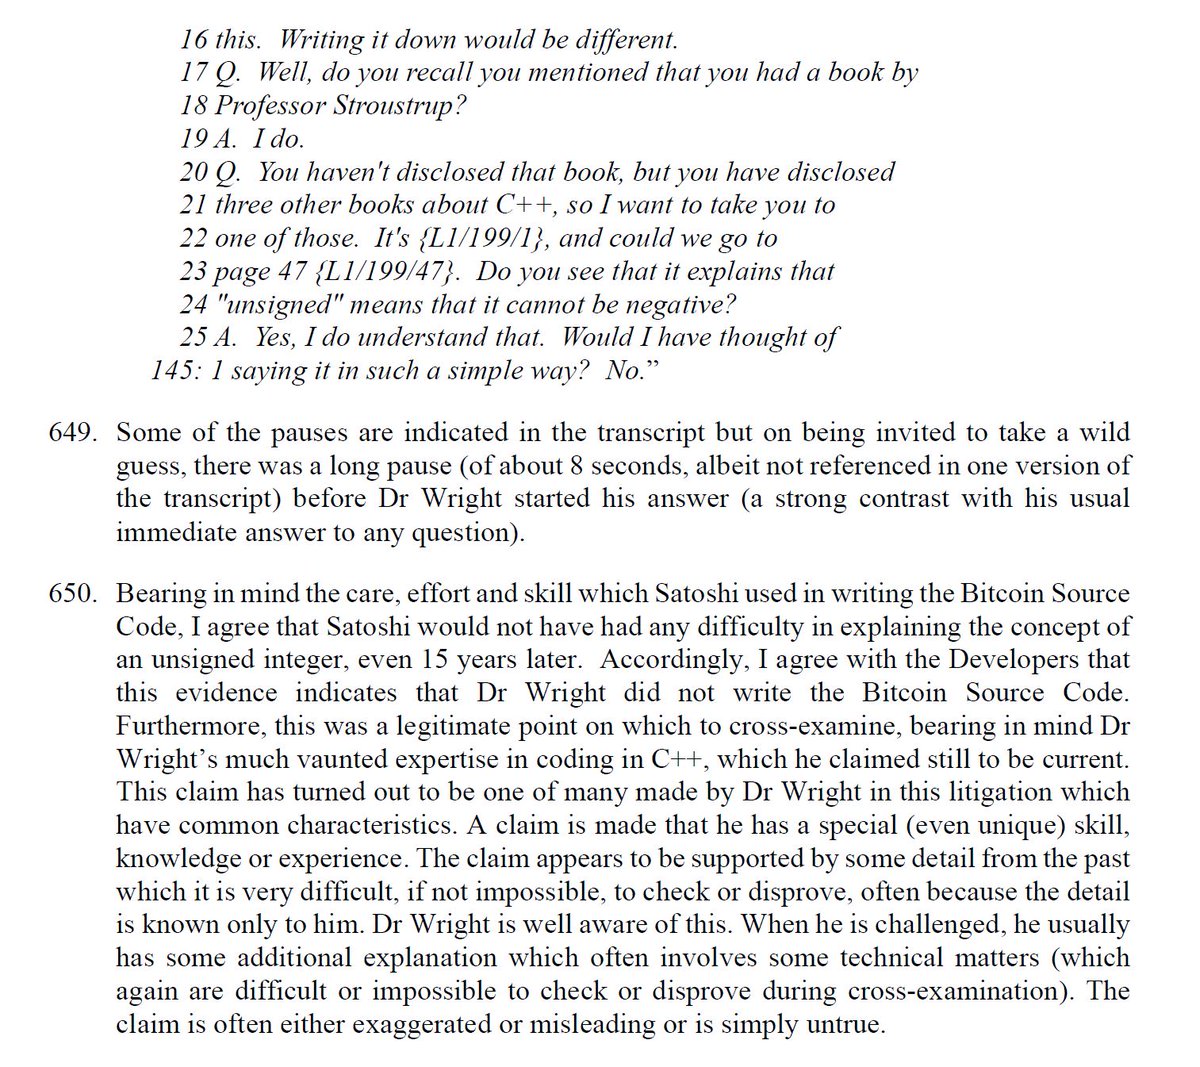 The section on the unsigned integer: 'I agree that Satoshi would not have had any difficulty in explaining the concept of an unsigned integer, even 15 years later. Accordingly, I agree with the Developers that this evidence indicates that Dr Wright did not write the Bitcoin